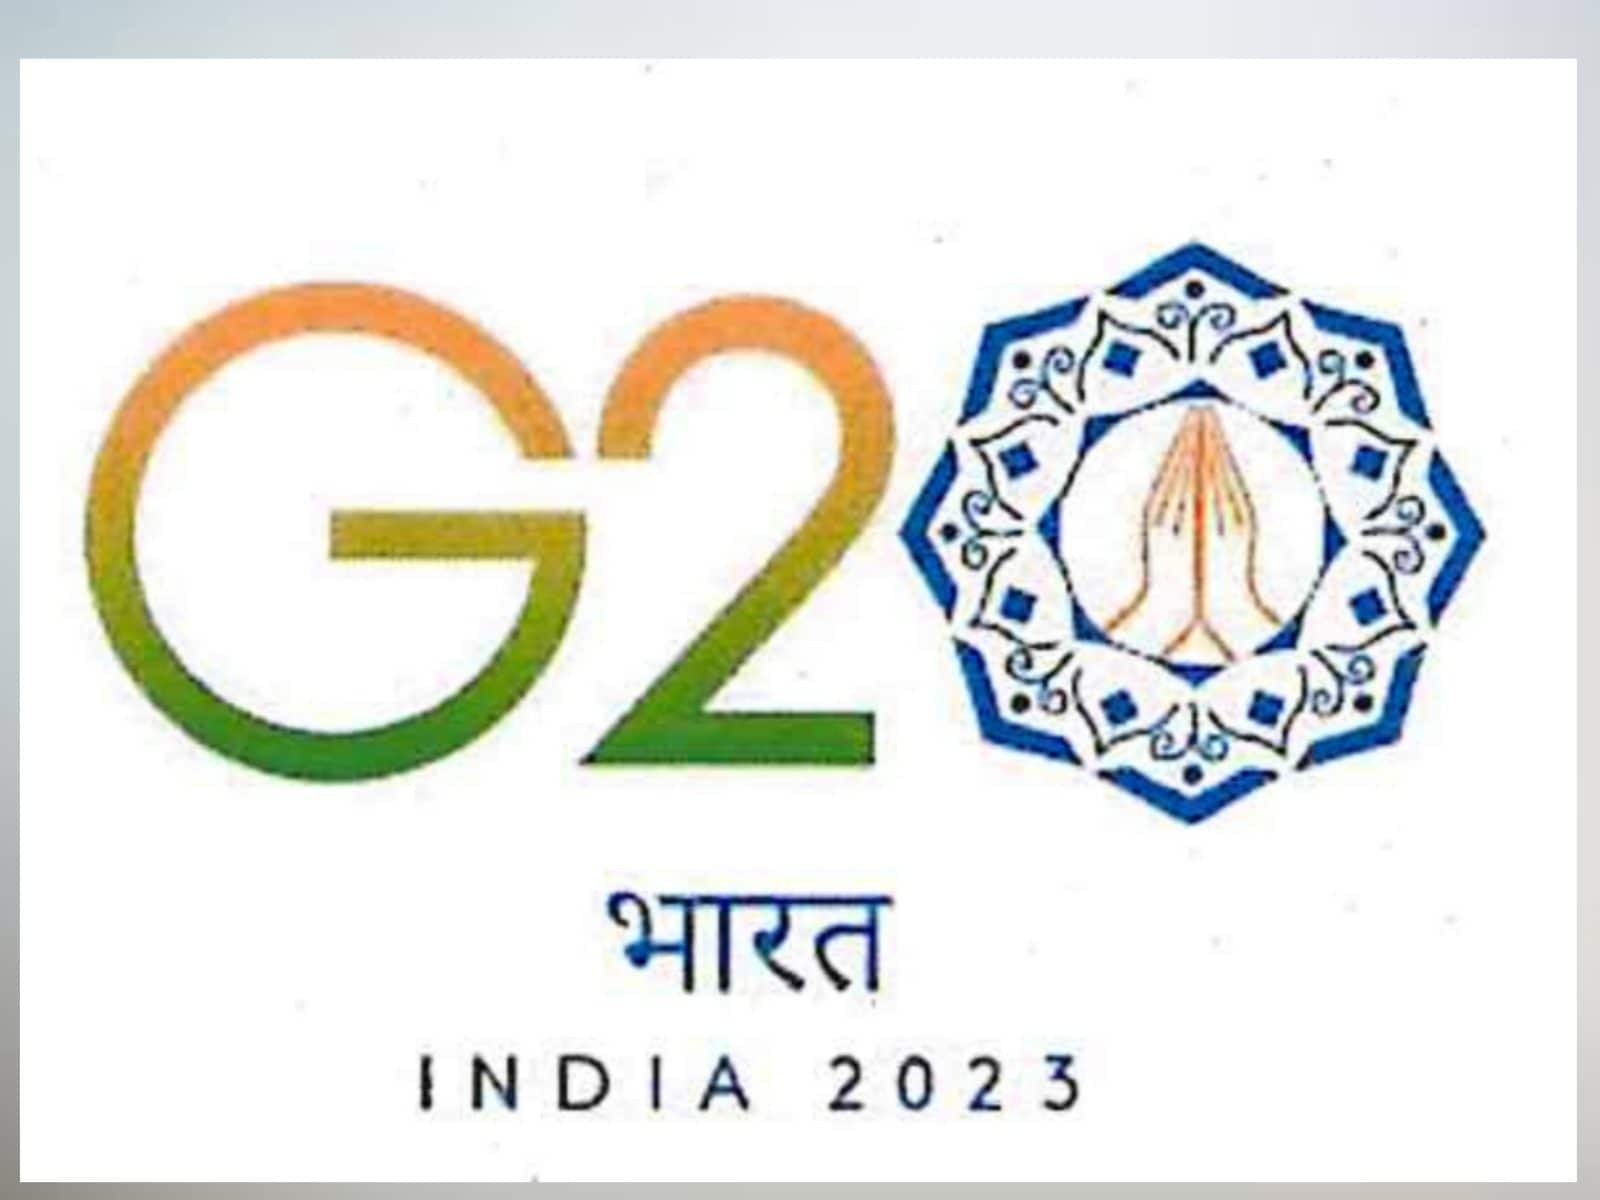 All you need to know about Civil20 India, group headed by 'Amma', its link  to G20